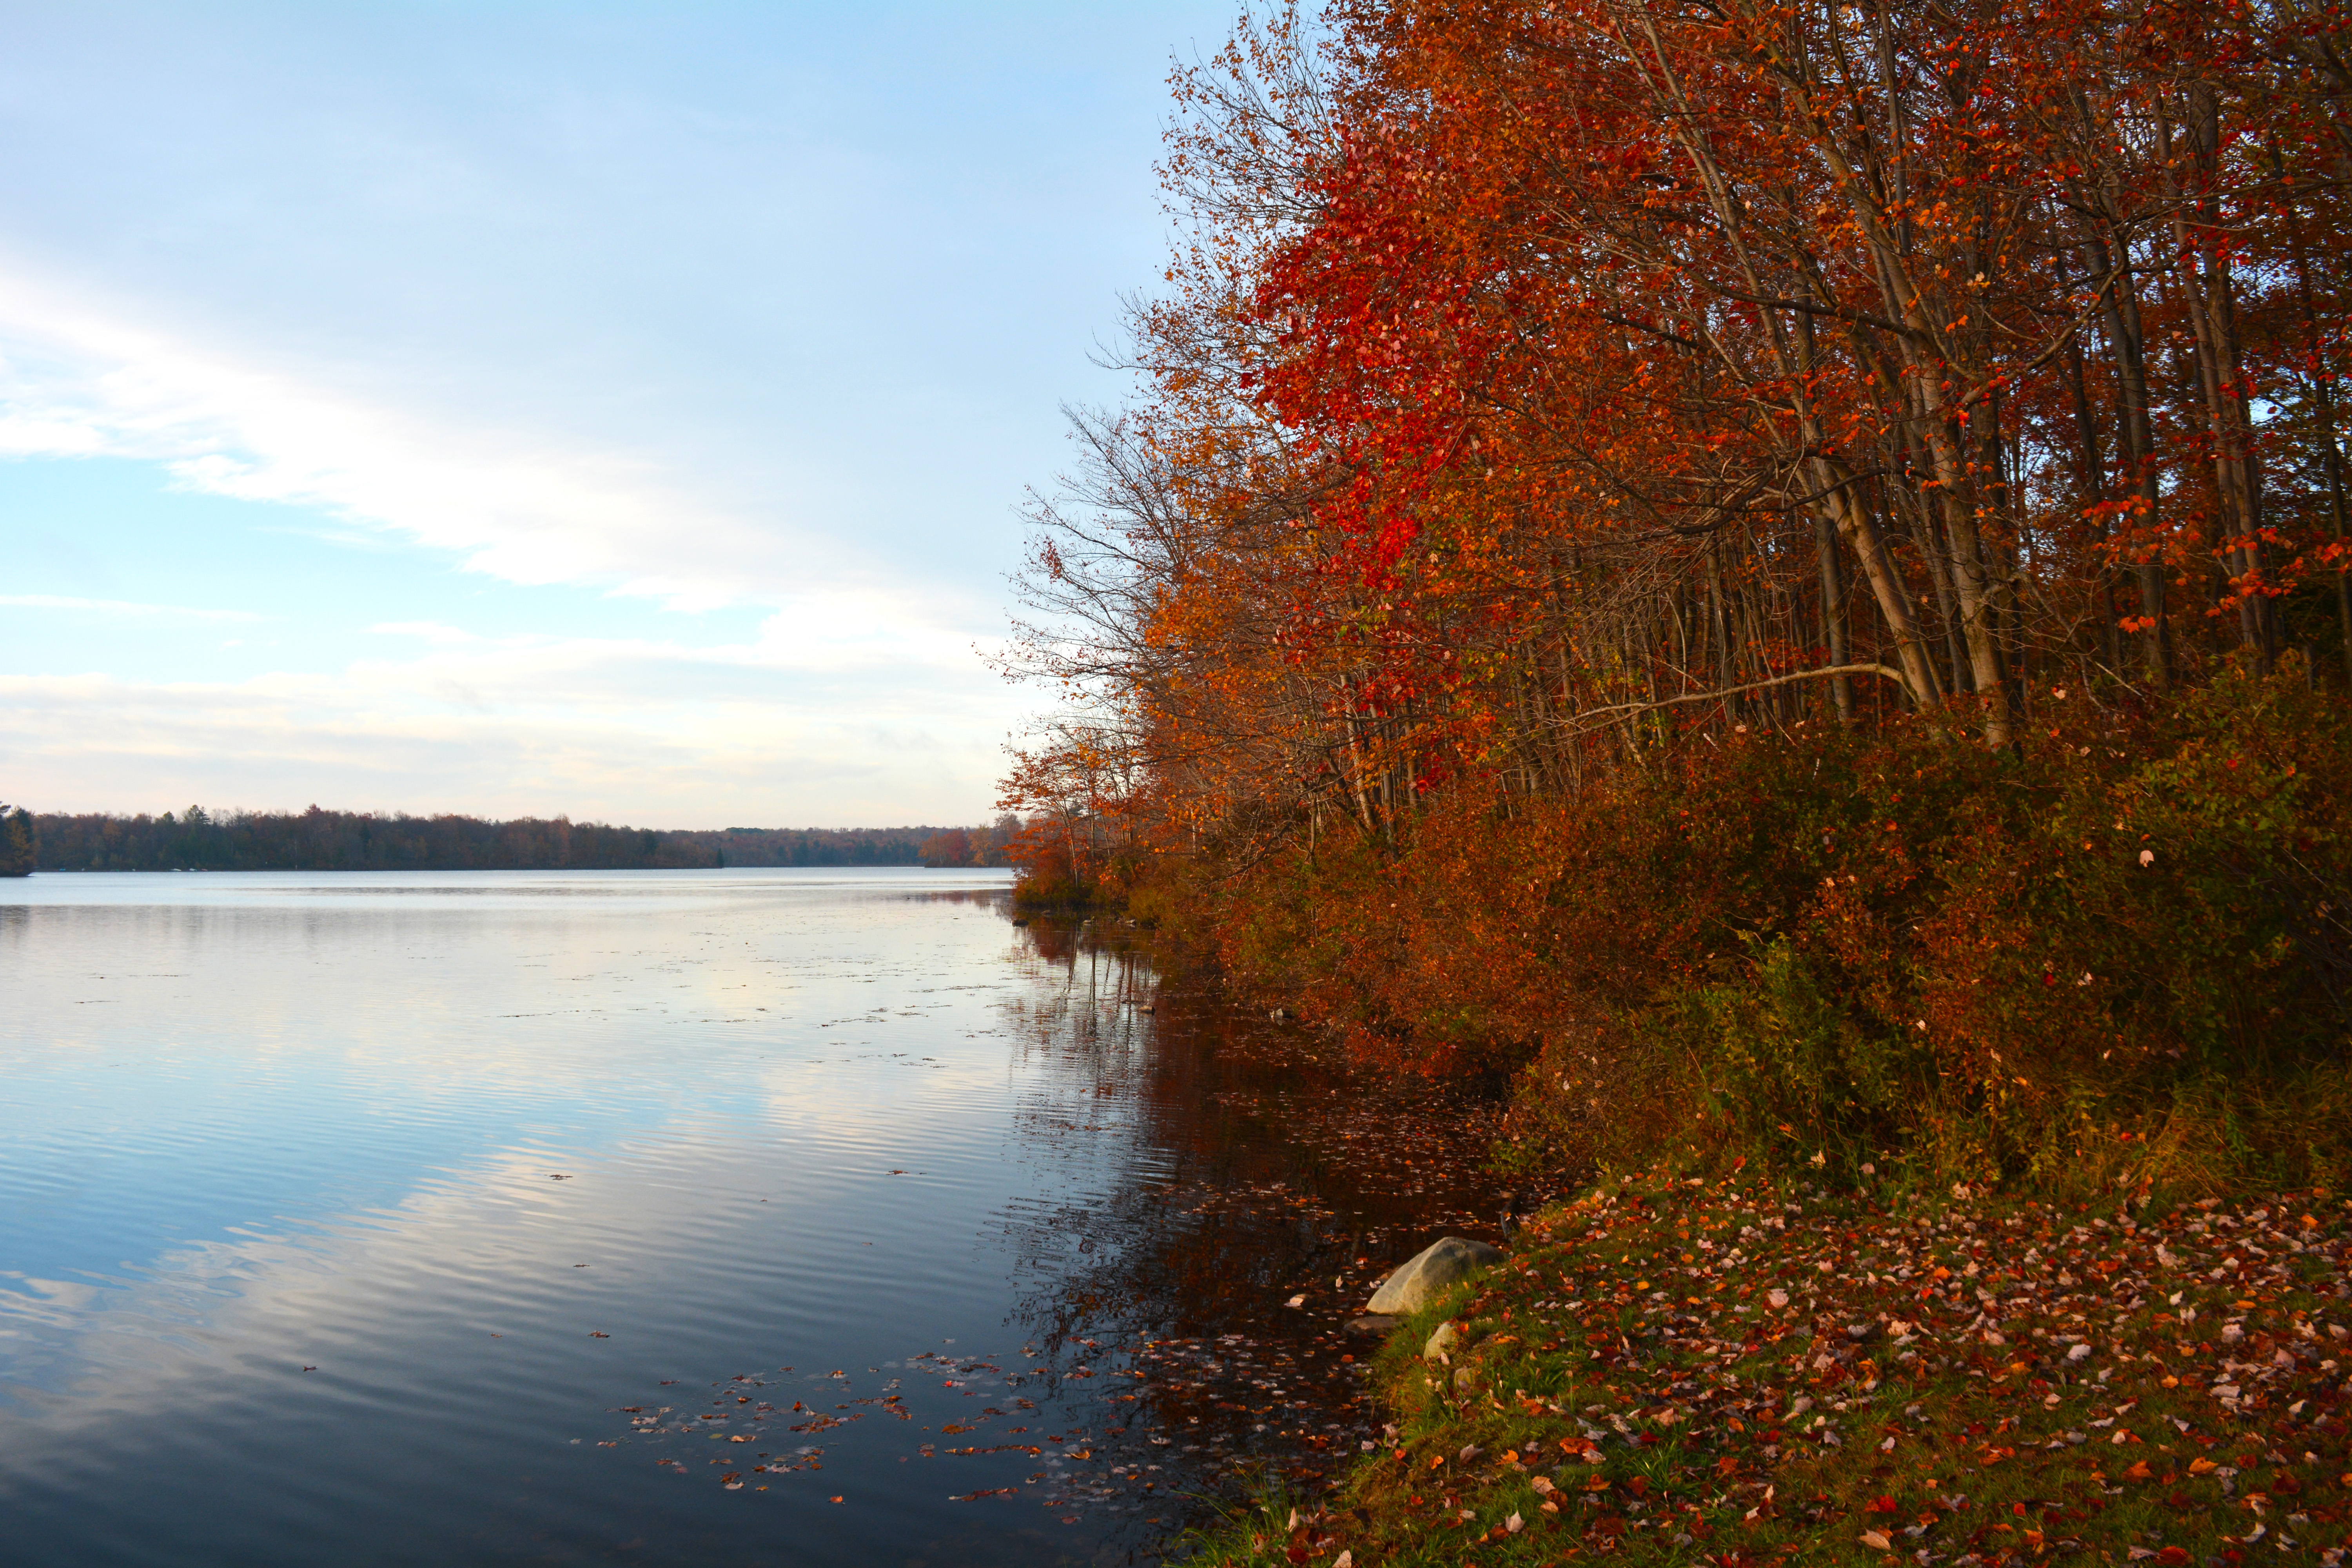 Sunrise view of Tobyhanna Lake with trees along the shore